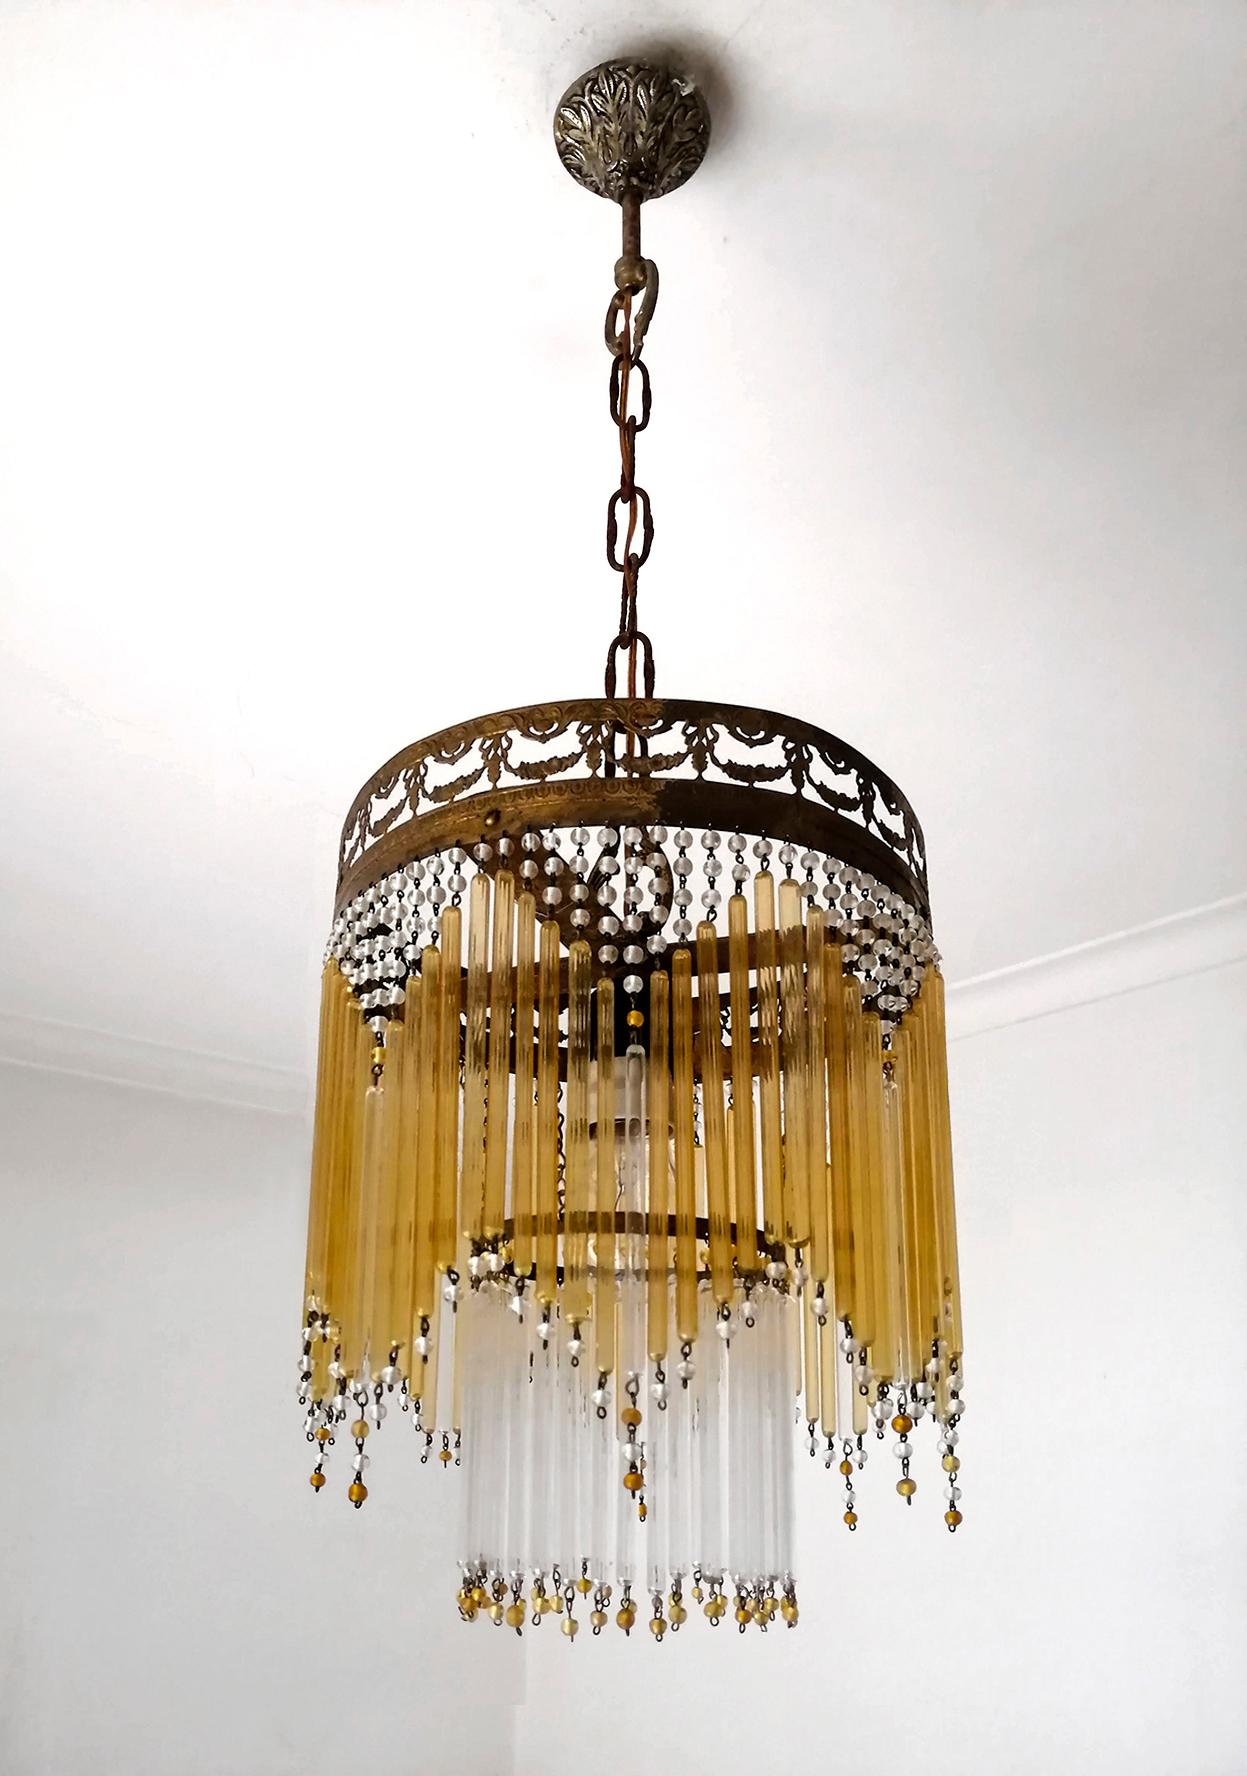 Antique French chandelier in amber beaded glass tubes, Art Deco / Art Nouveau.
Dimensions
Height 27.56 in. (chain = 10 in.) /70 cm (chain = 25 cm)
Diameter 9.85 in. (25 cm)


1-light bulb E27/ good working condition
Assembly required. Bulbs